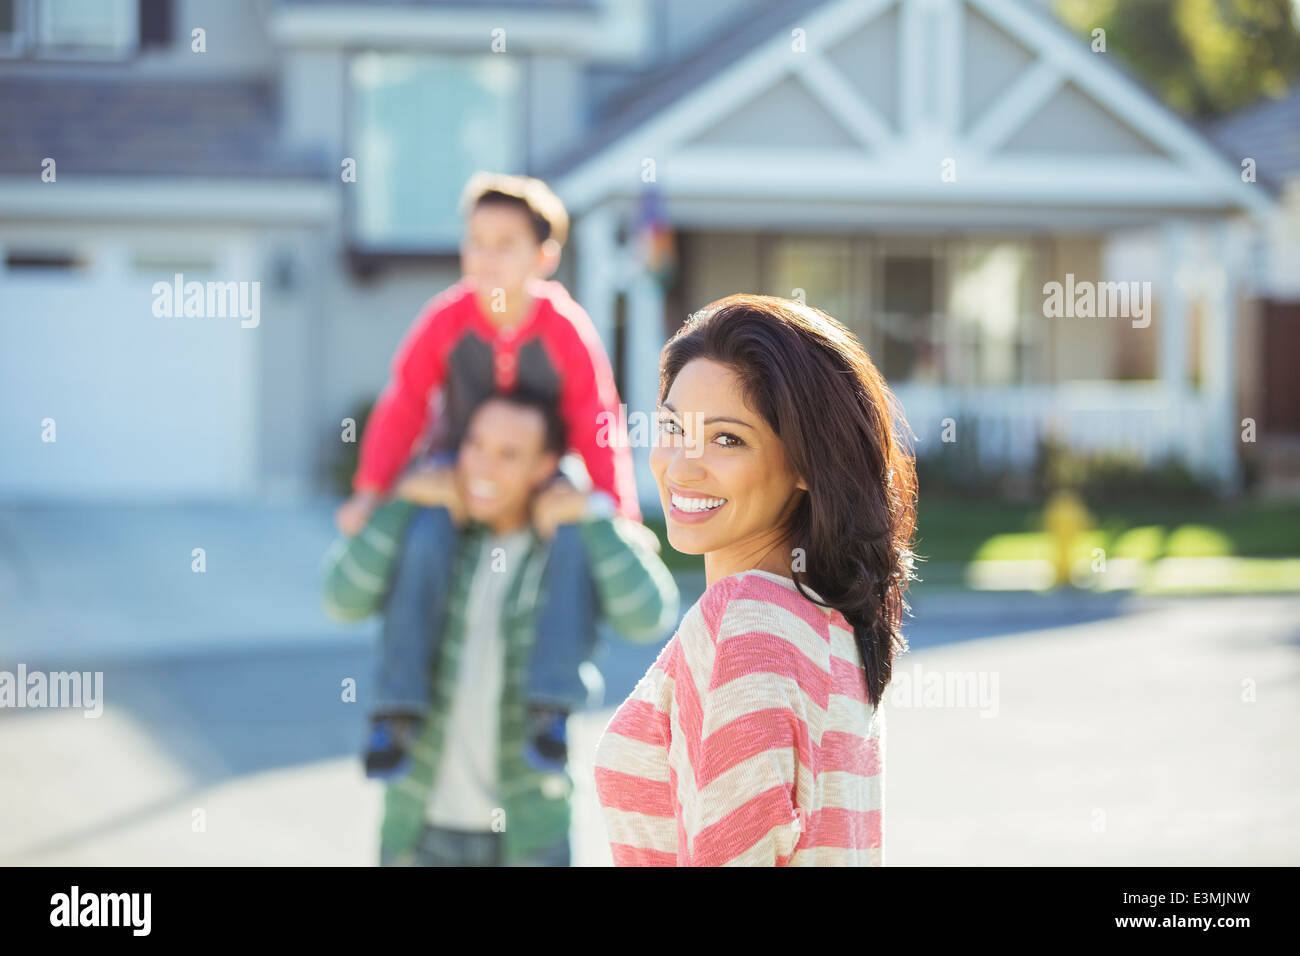 Portrait of smiling woman with family on street Stock Photo